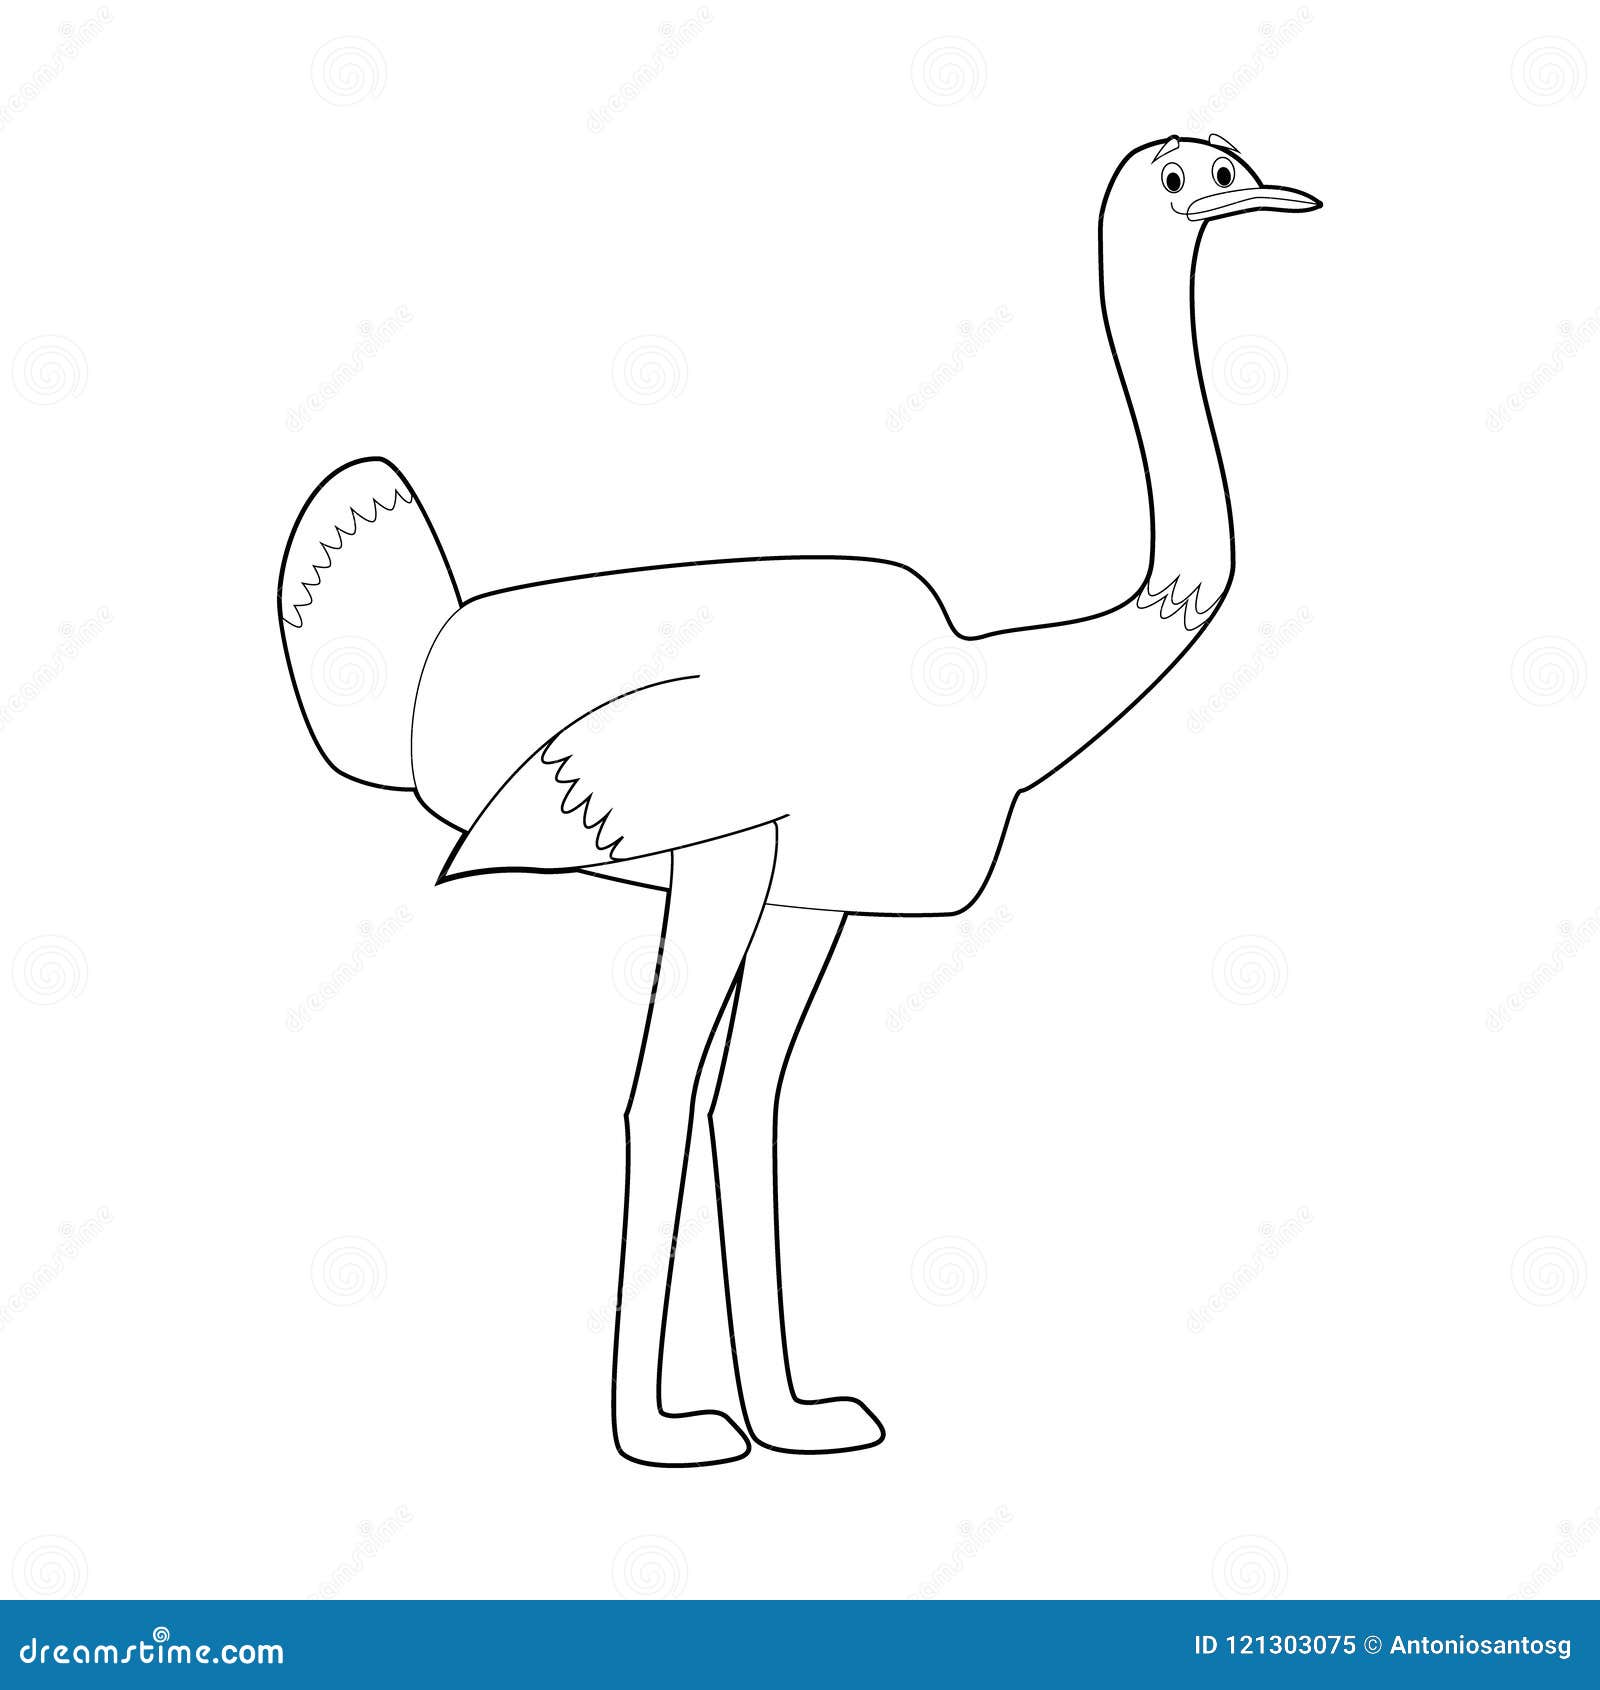 Learn how to easily draw an ostrich - YouTube